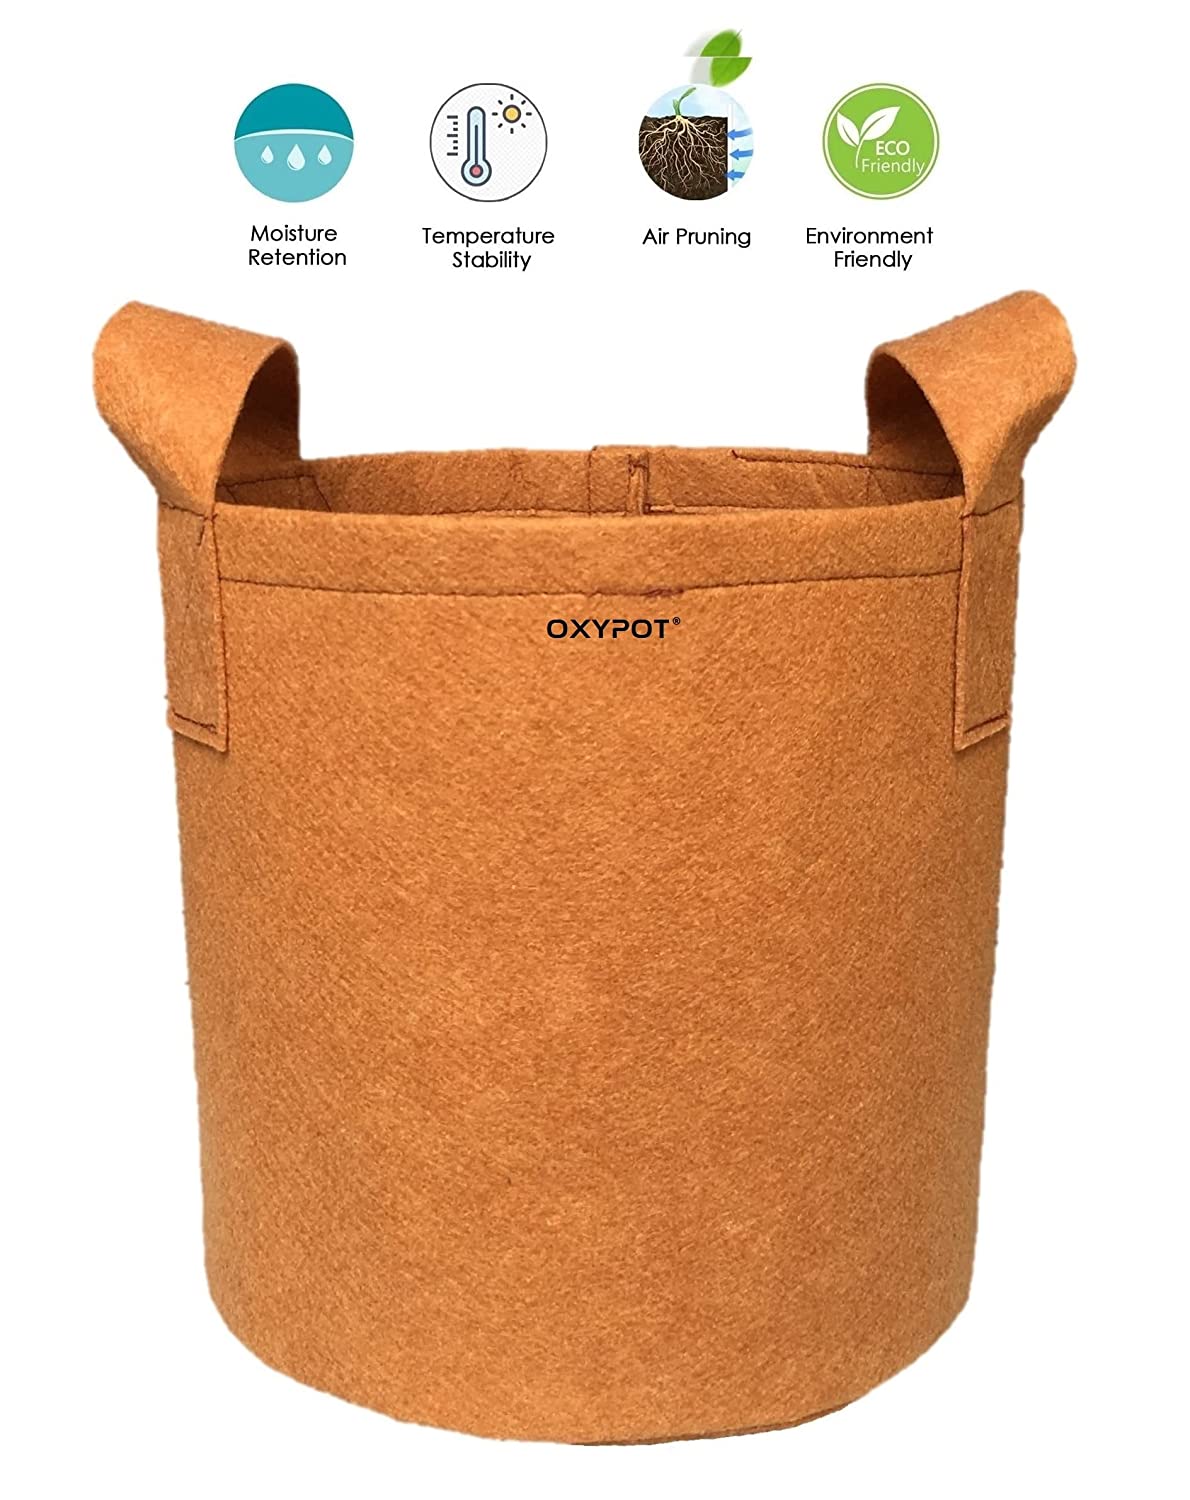 Oxypot Fabric Grow Bags (Multi-Colour, 12x12 Inches)